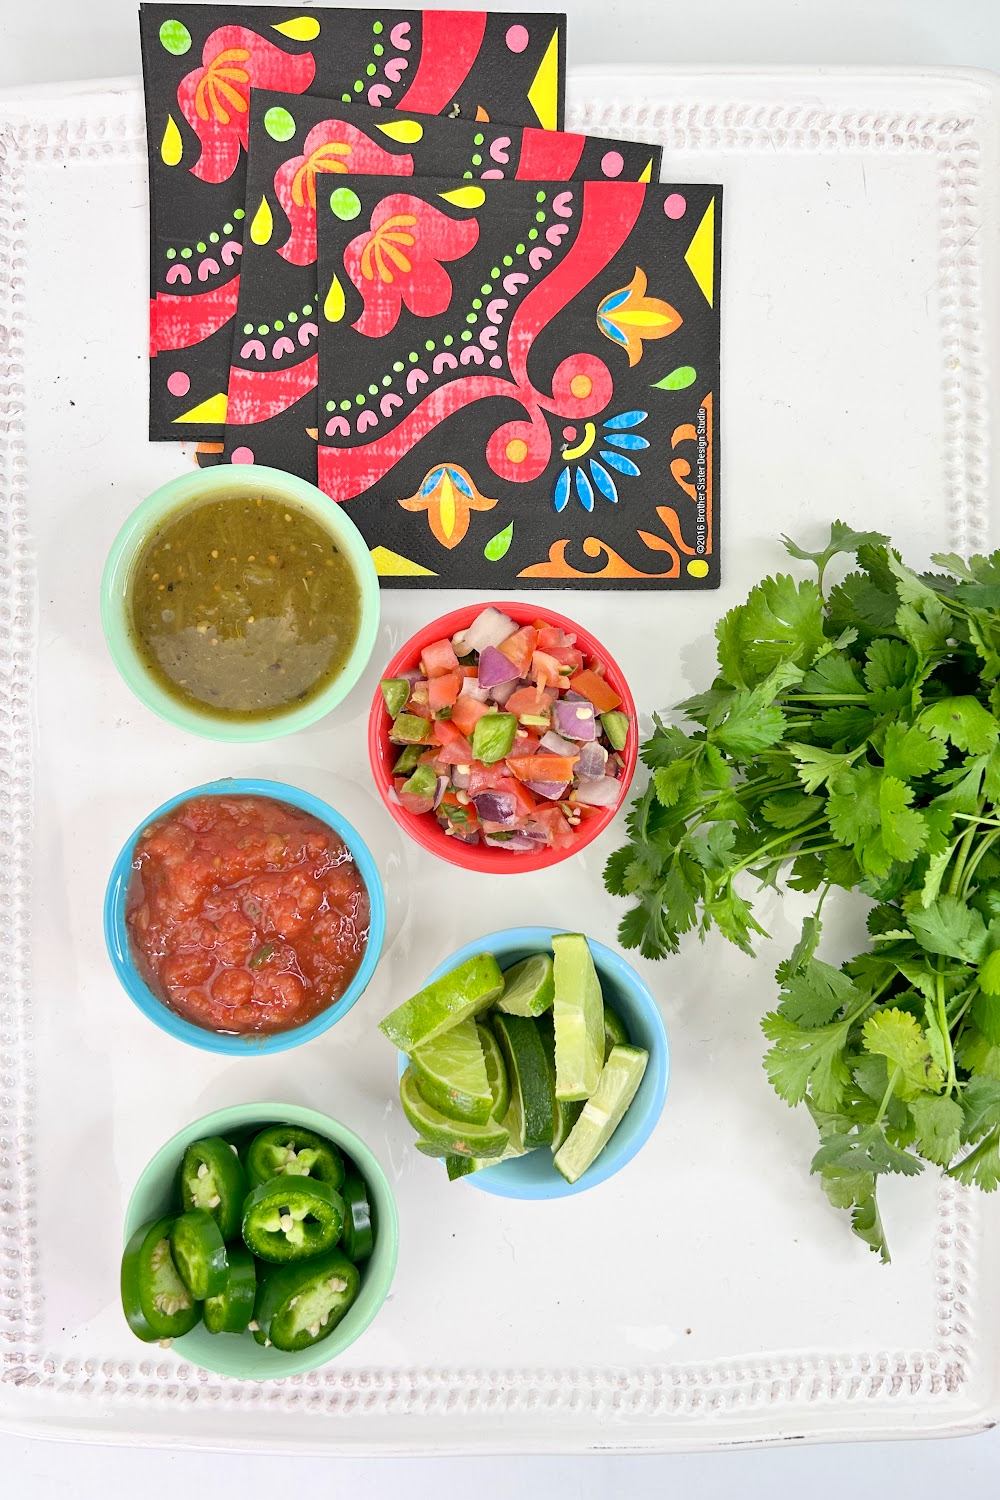 Small bowls of Mexican salsas, dips and peppers.